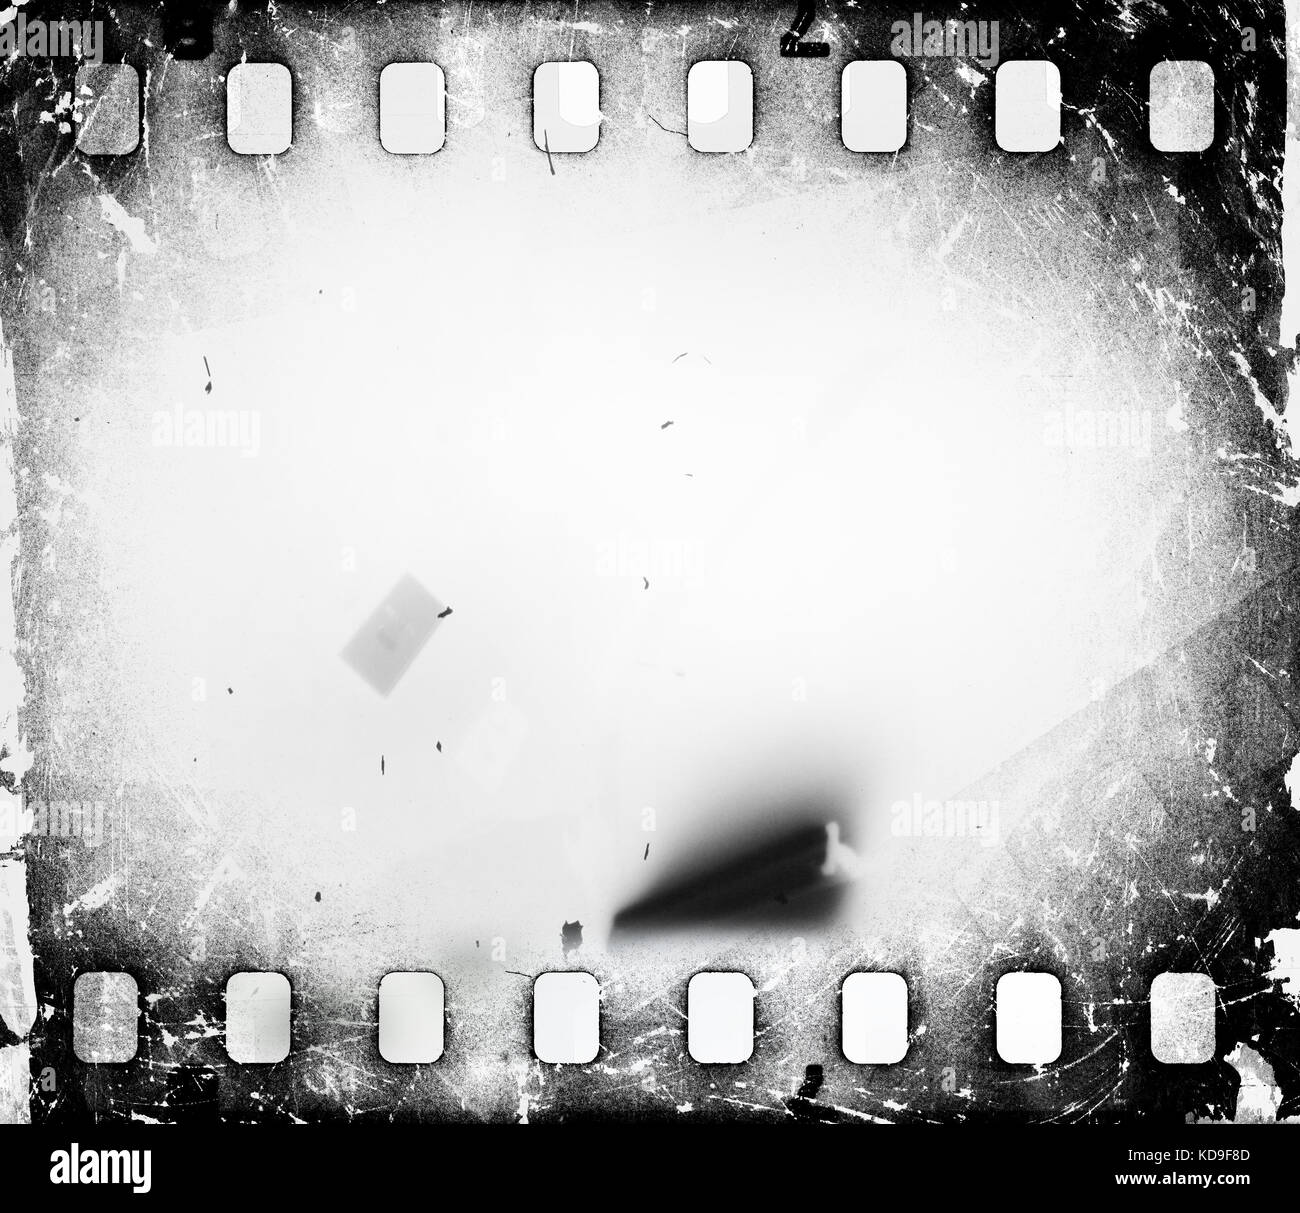 Grunge scratched dirty film strip background with blurred effect. Stock Photo